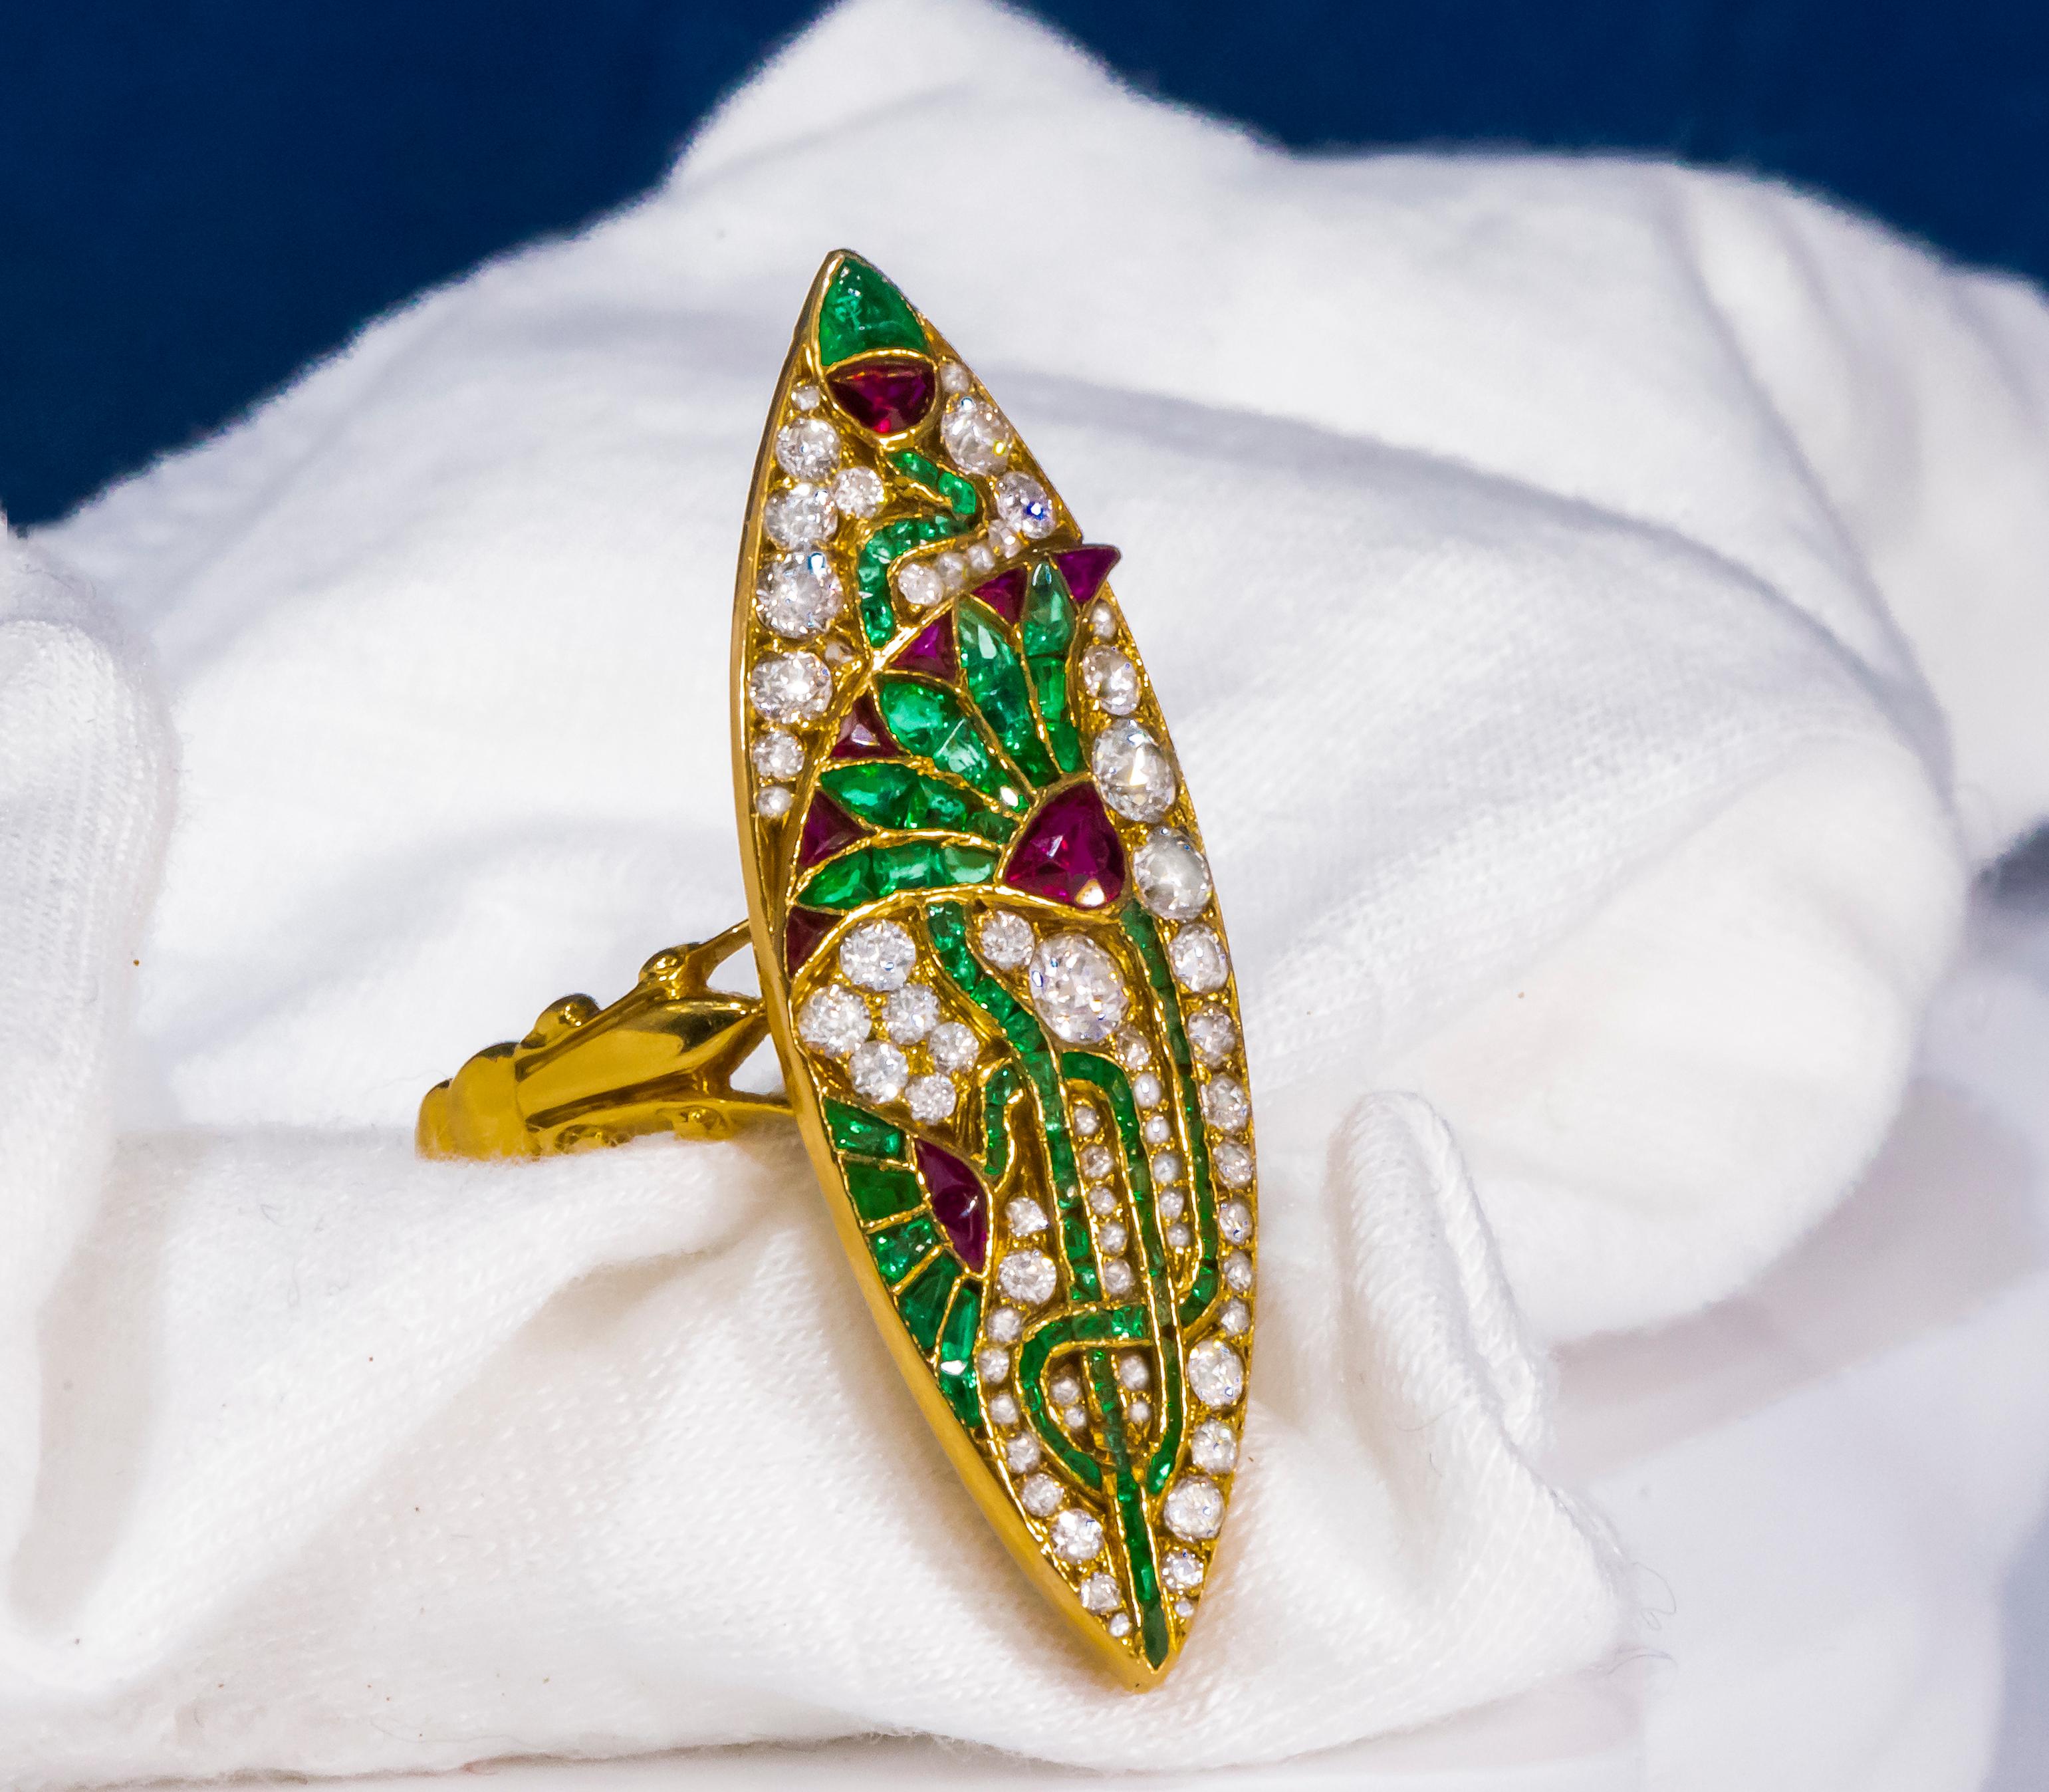 Impressive 1890s French Egyptian Revival Motif Ruby Emerald Diamond Lotus Ring For Sale 3